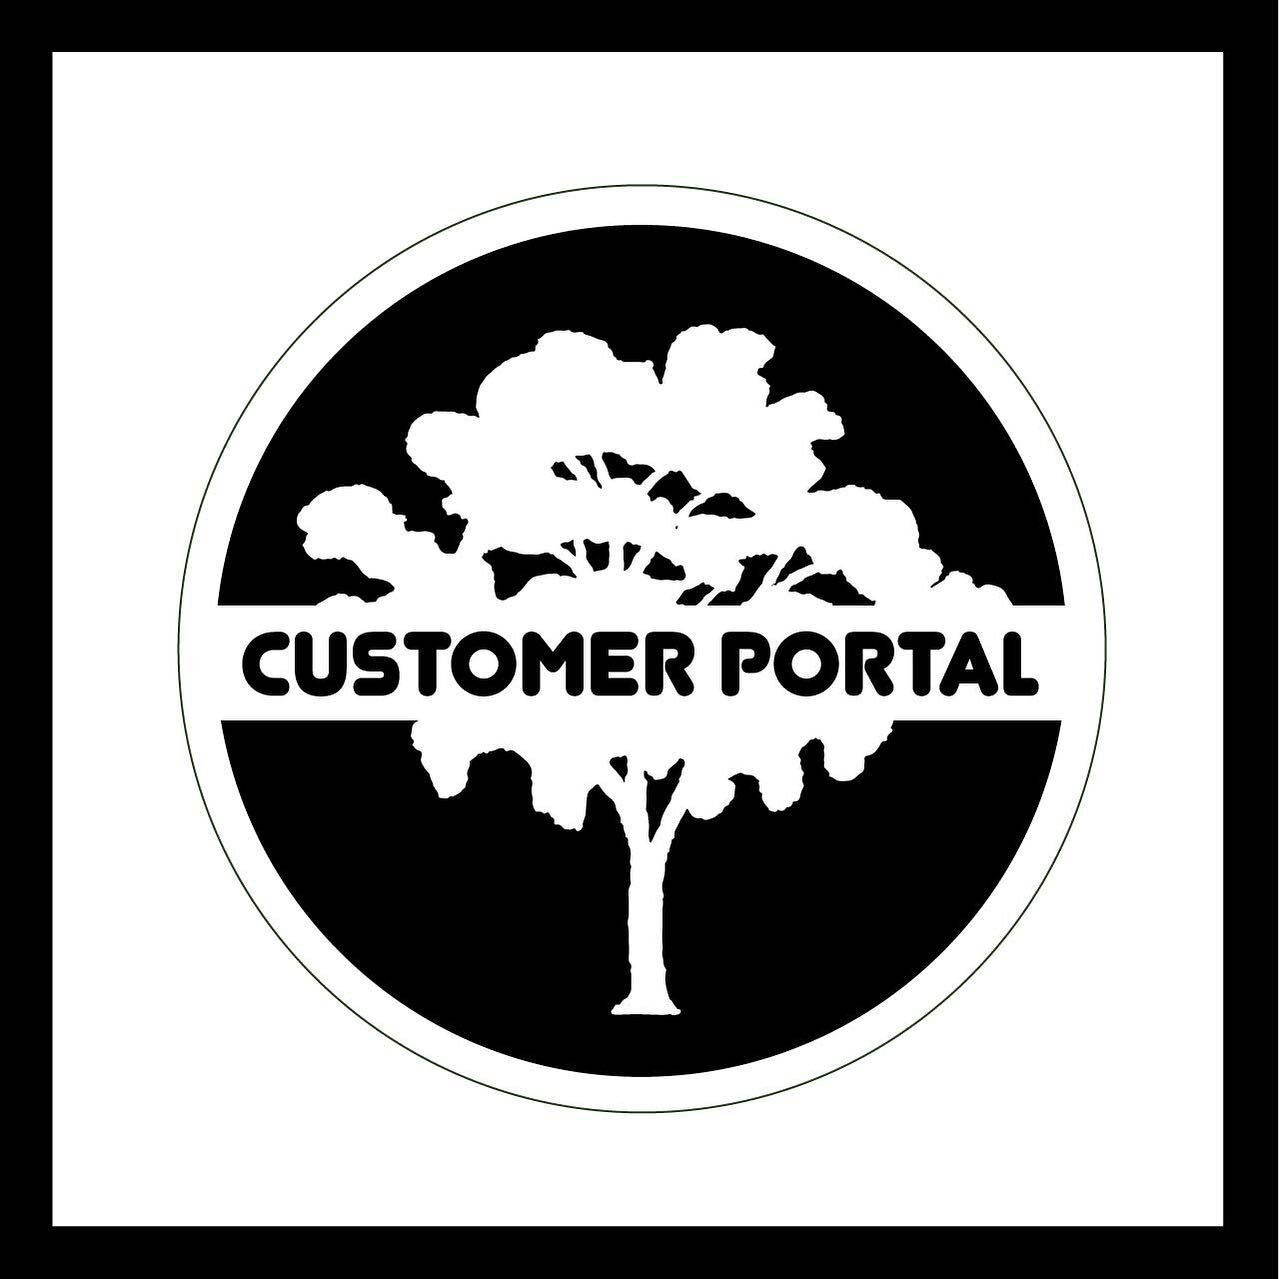 We are thrilled to announce our new&nbsp;CUSTOMER PORTAL, which provides the following enhancements to the customer experience at Downer Brothers Landscaping, Inc.:

	&bull;	Easy Service Renewals&nbsp;
	&bull;	Easy Estimate/Proposal  Processing&nbsp;